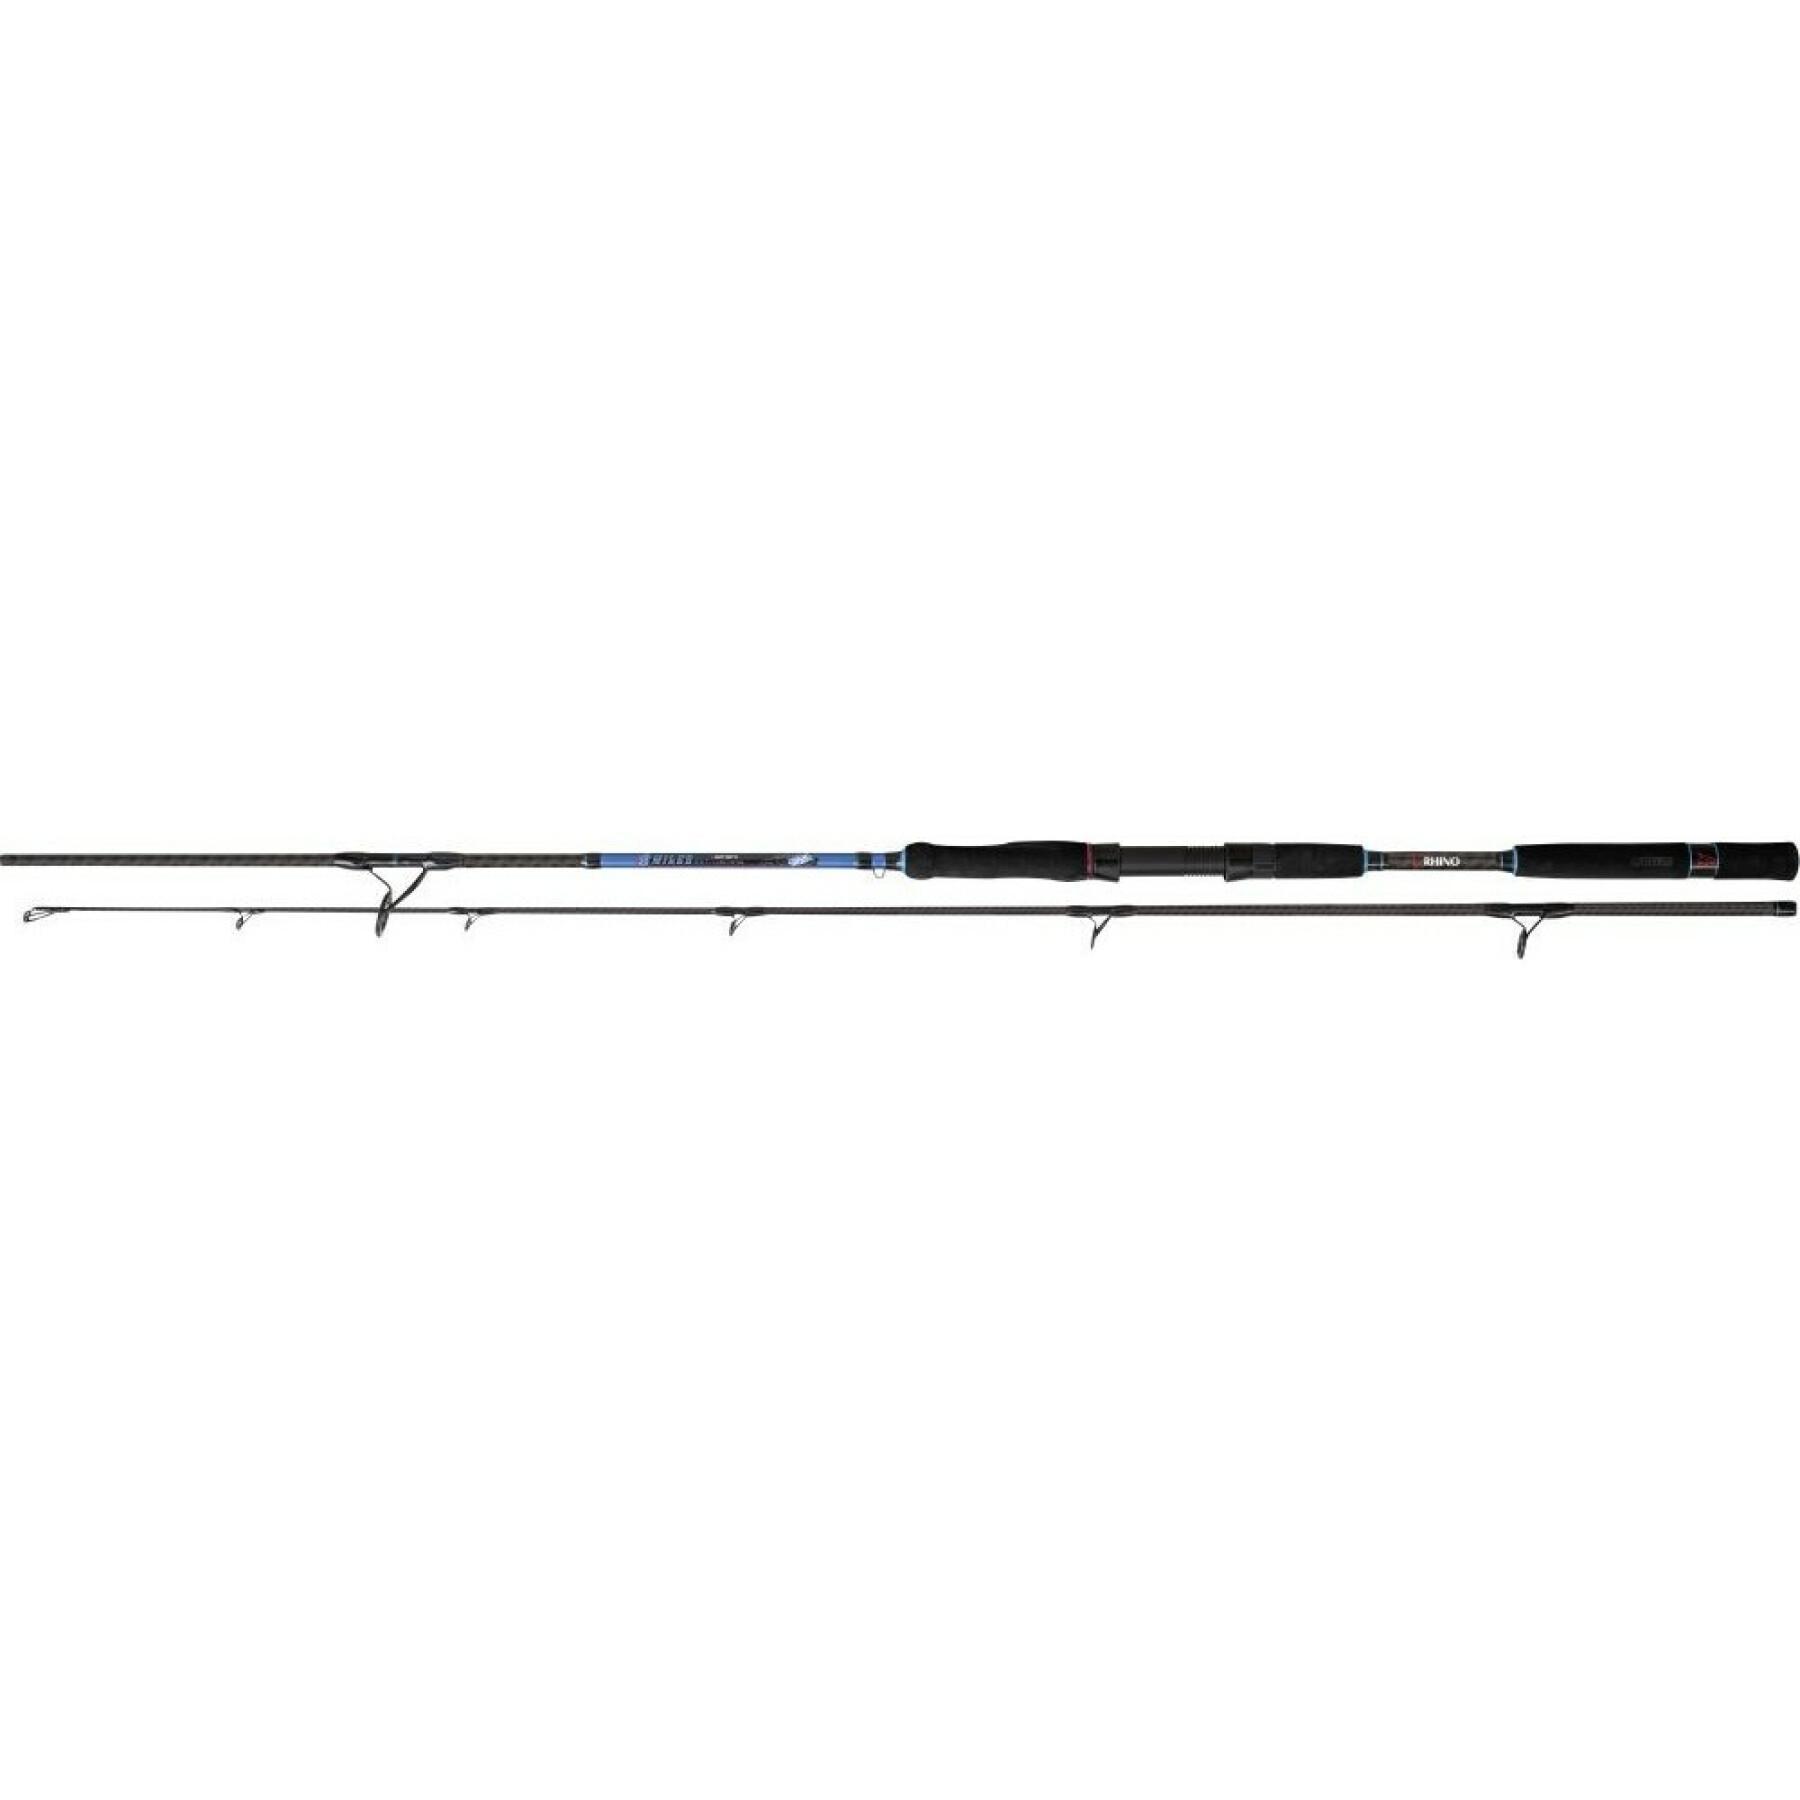 Caña Rhino 8 Miles Out Boat Cast M 165g